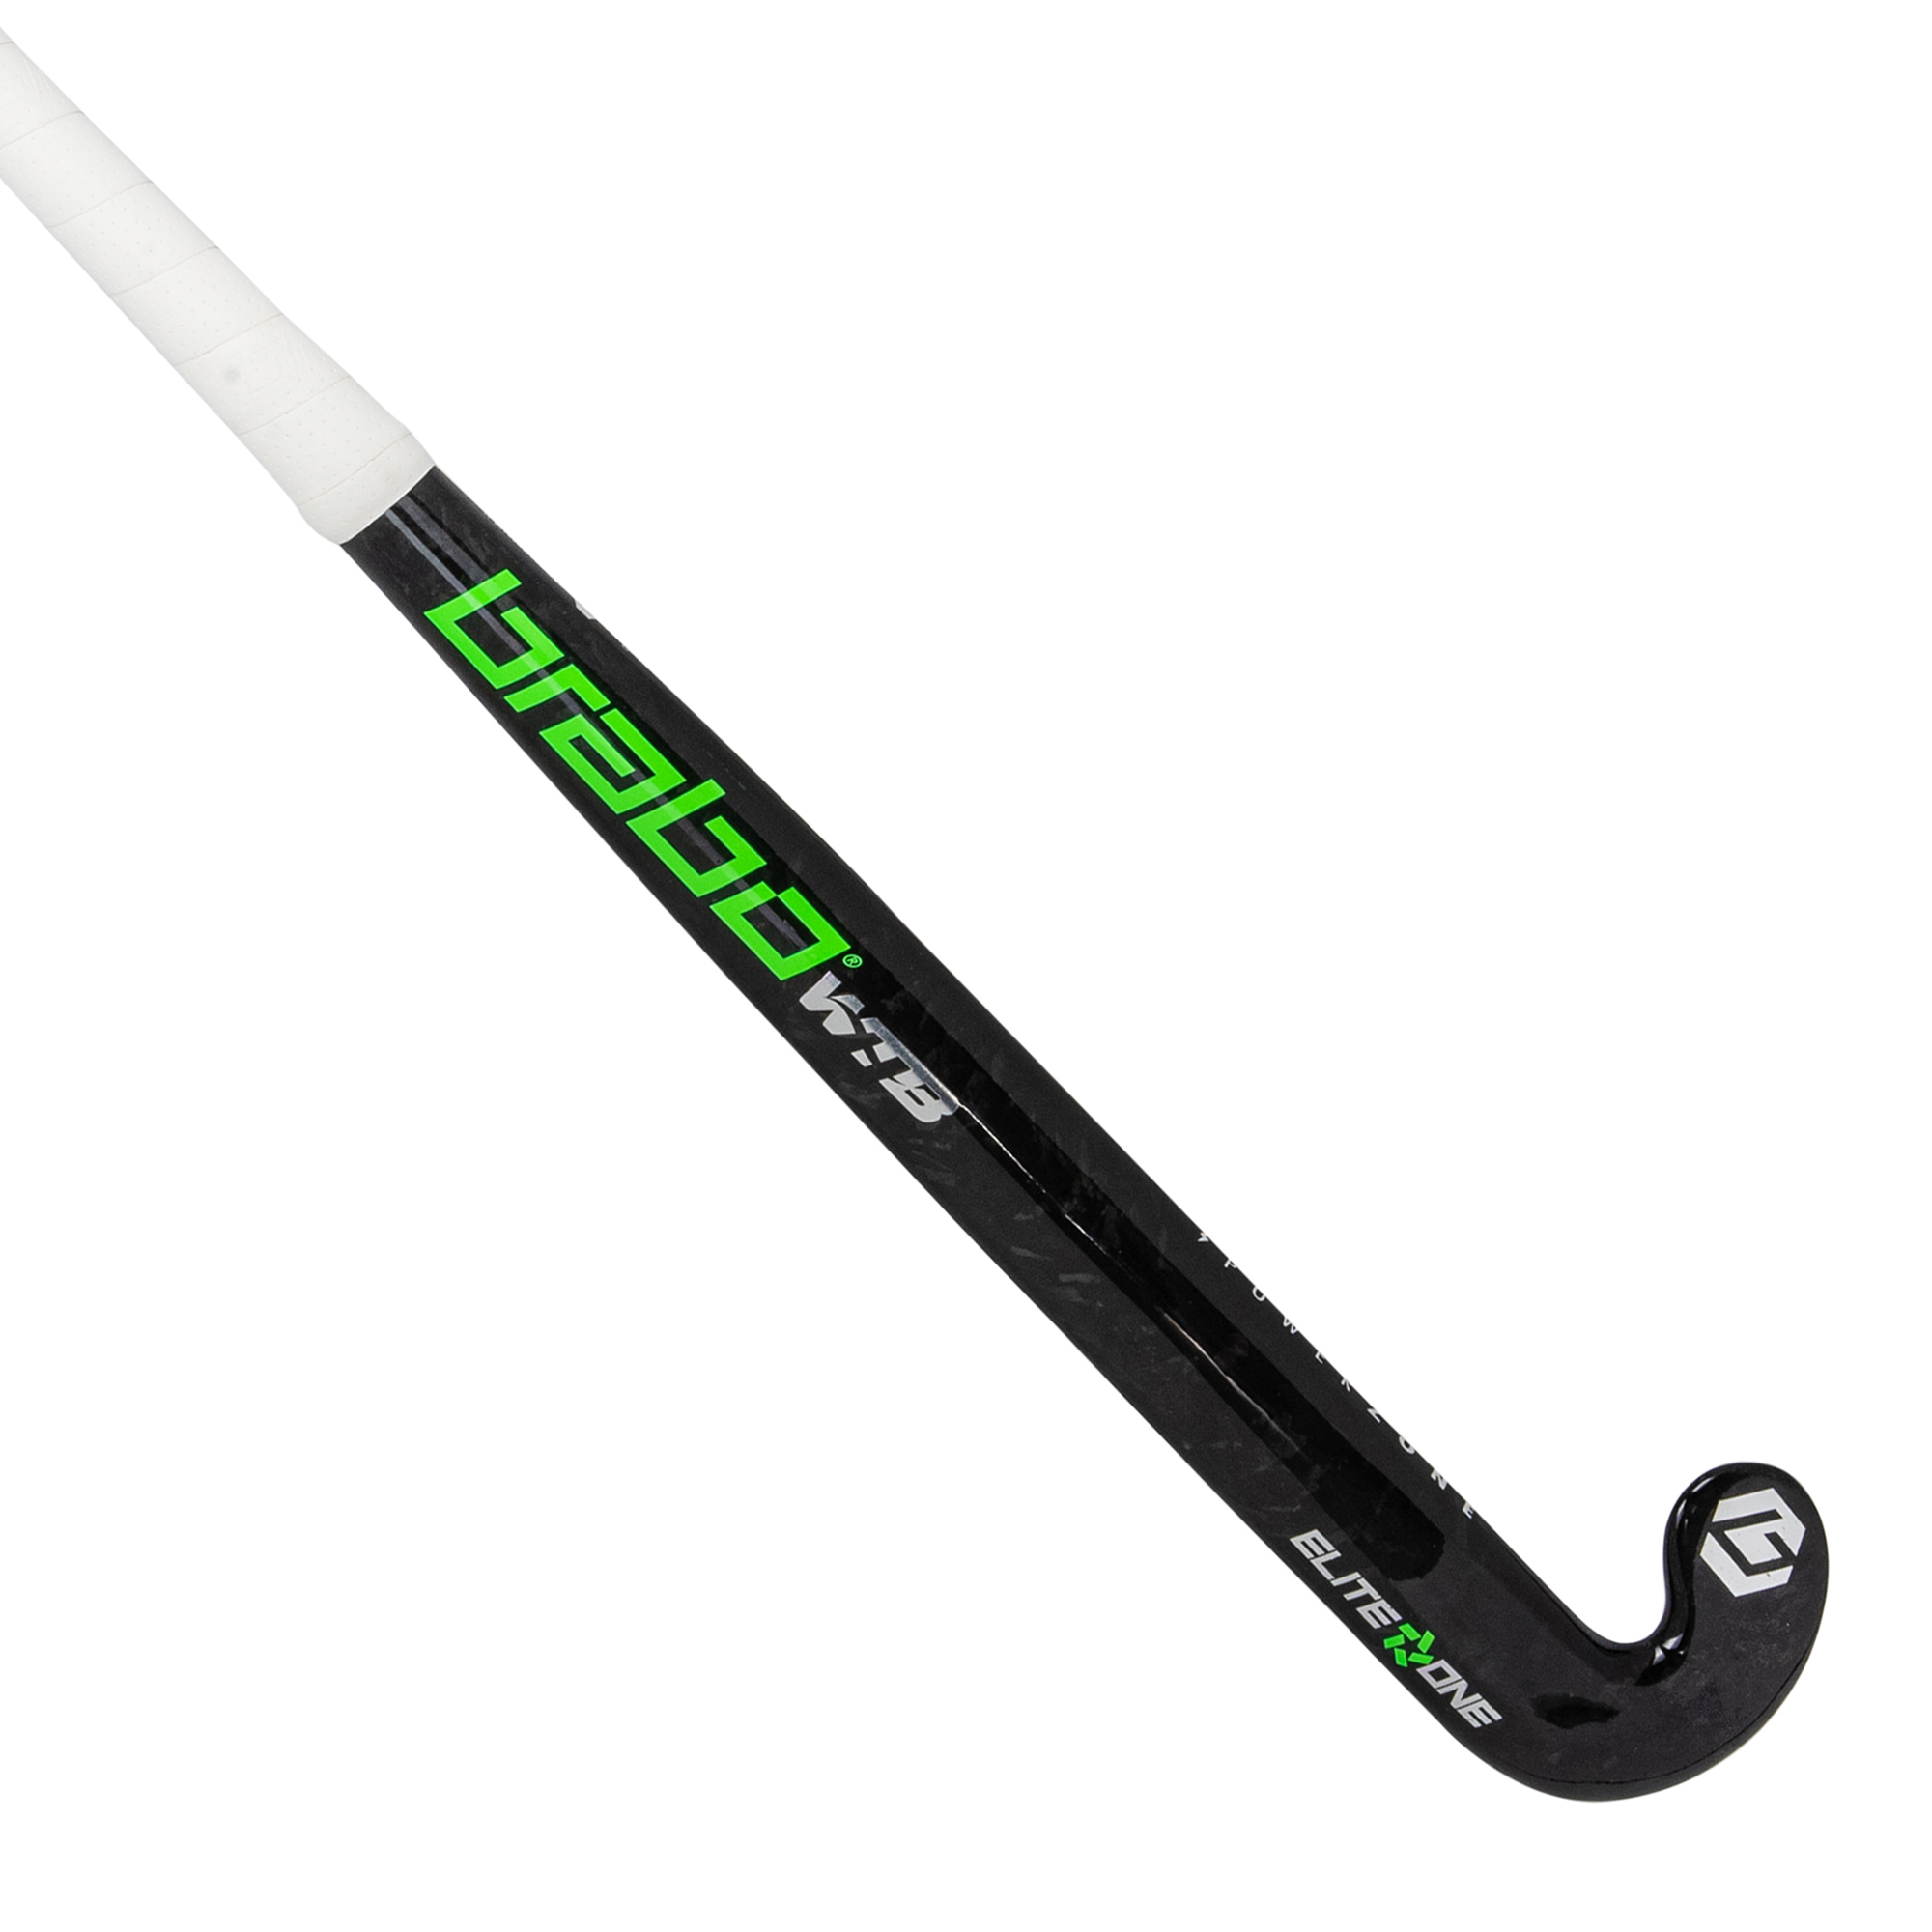 IT Elite 1 Forged Carbon Extreme Low Bow